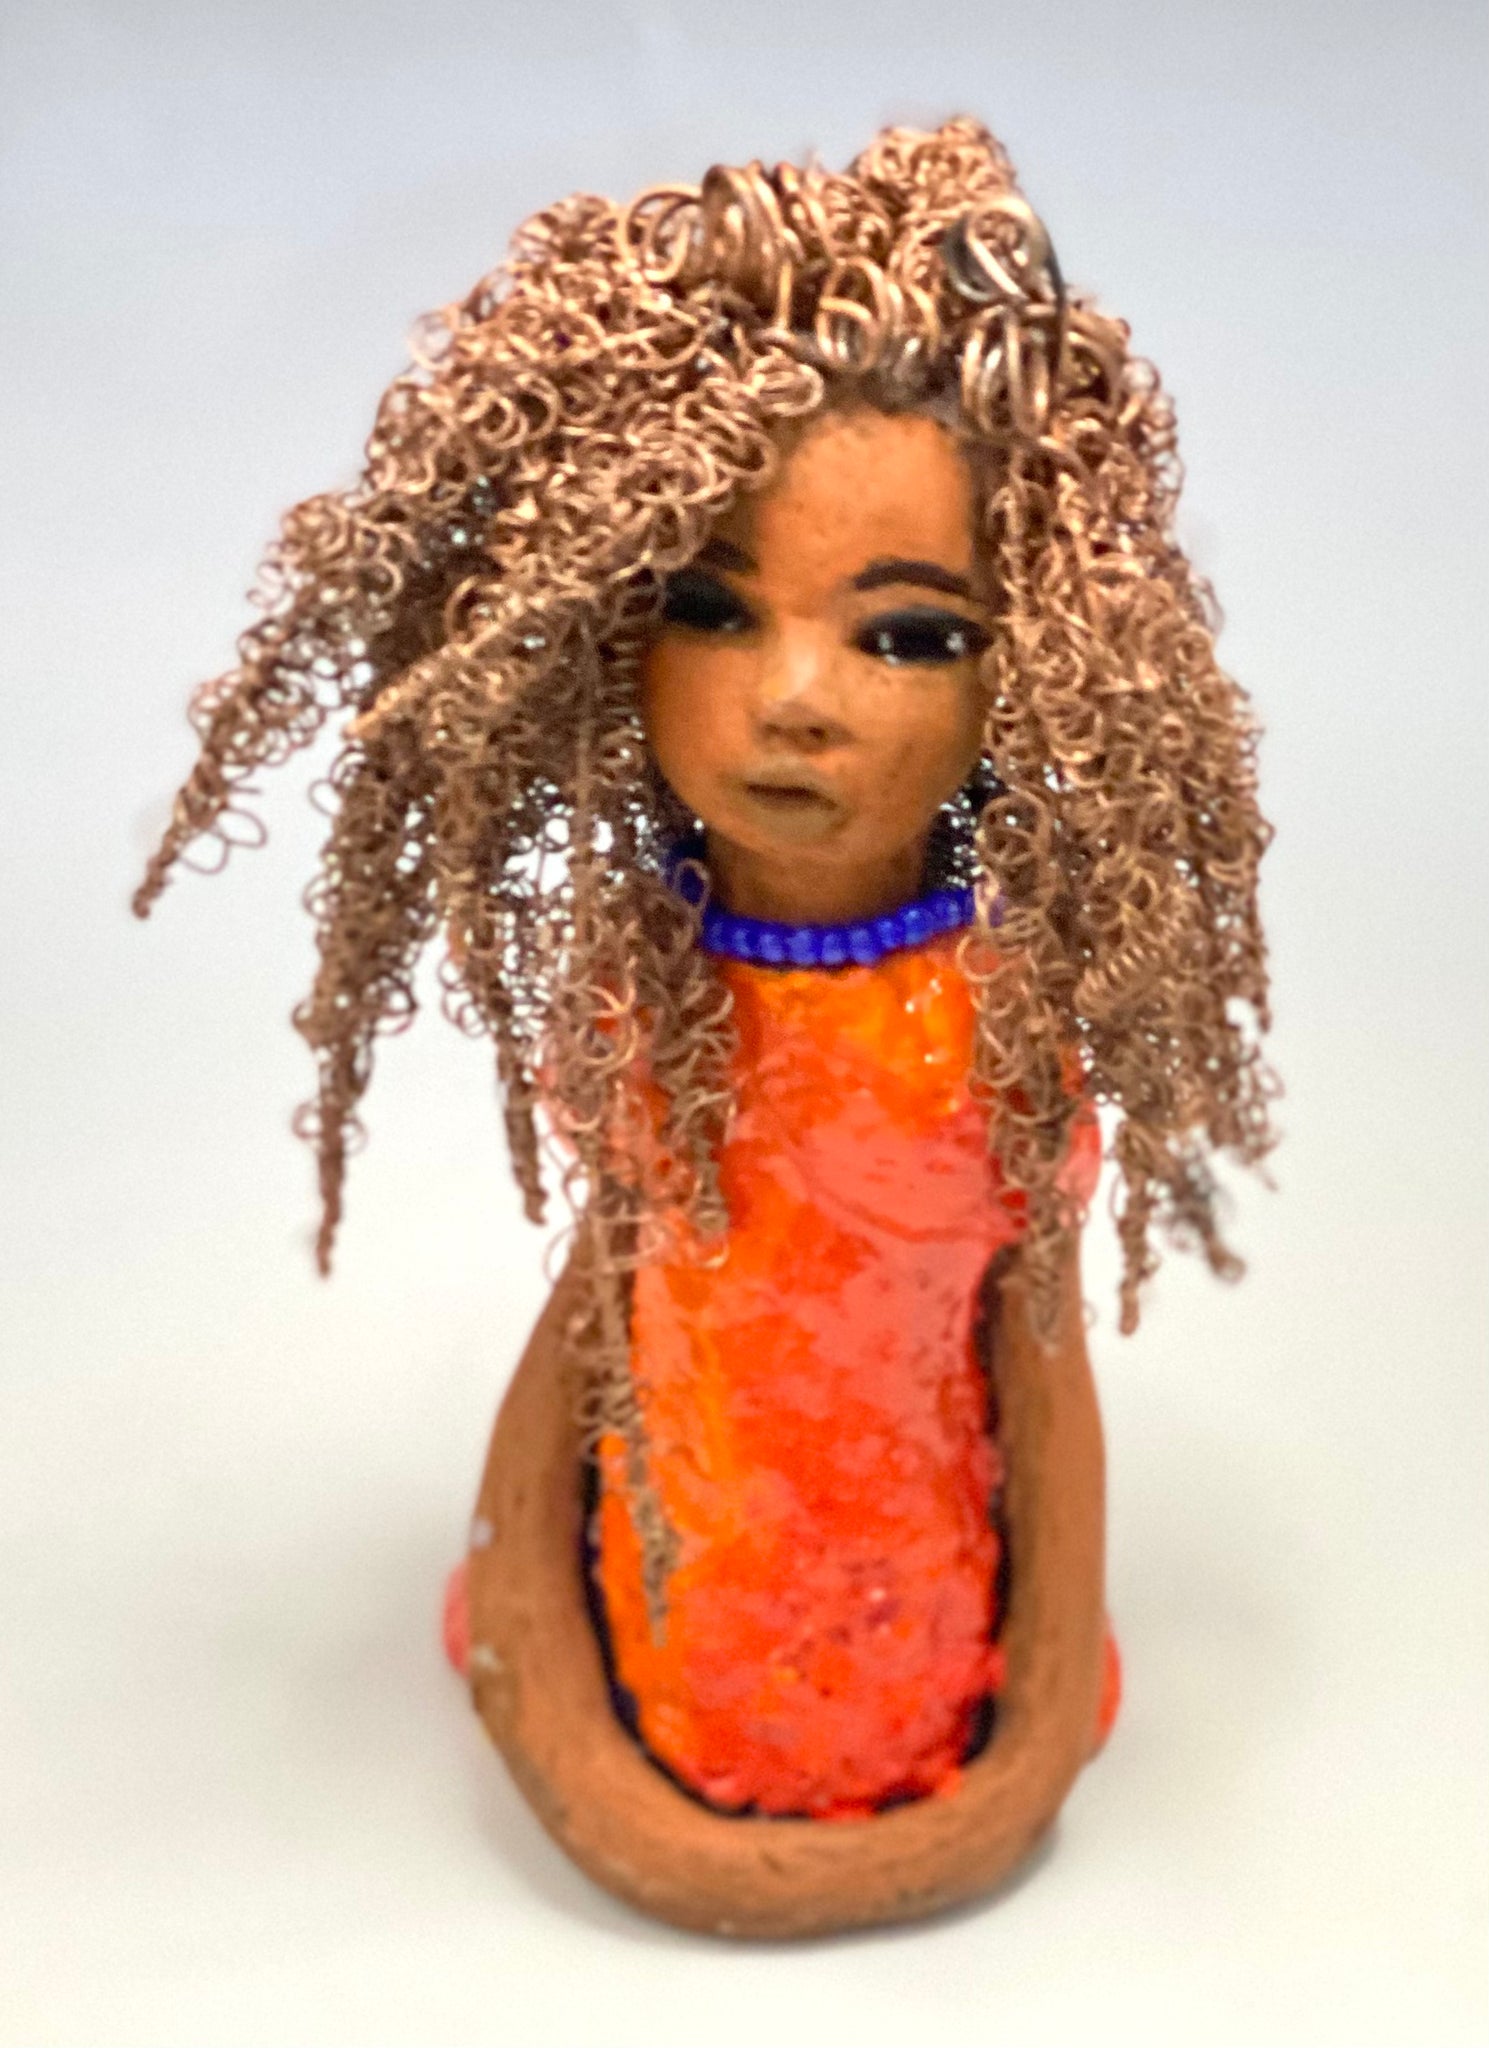 Meet Jada! Jada stands 8" x 3.5" x 3.5" and weighs 1 lb. She has a lovely honey brown complexion. Jada's dress is simply bright orange. She has her long loving arms resting at her side. " I am really pleased with Jada's blue beaded necklace and her new wire hair Find a place in your space for Jada!